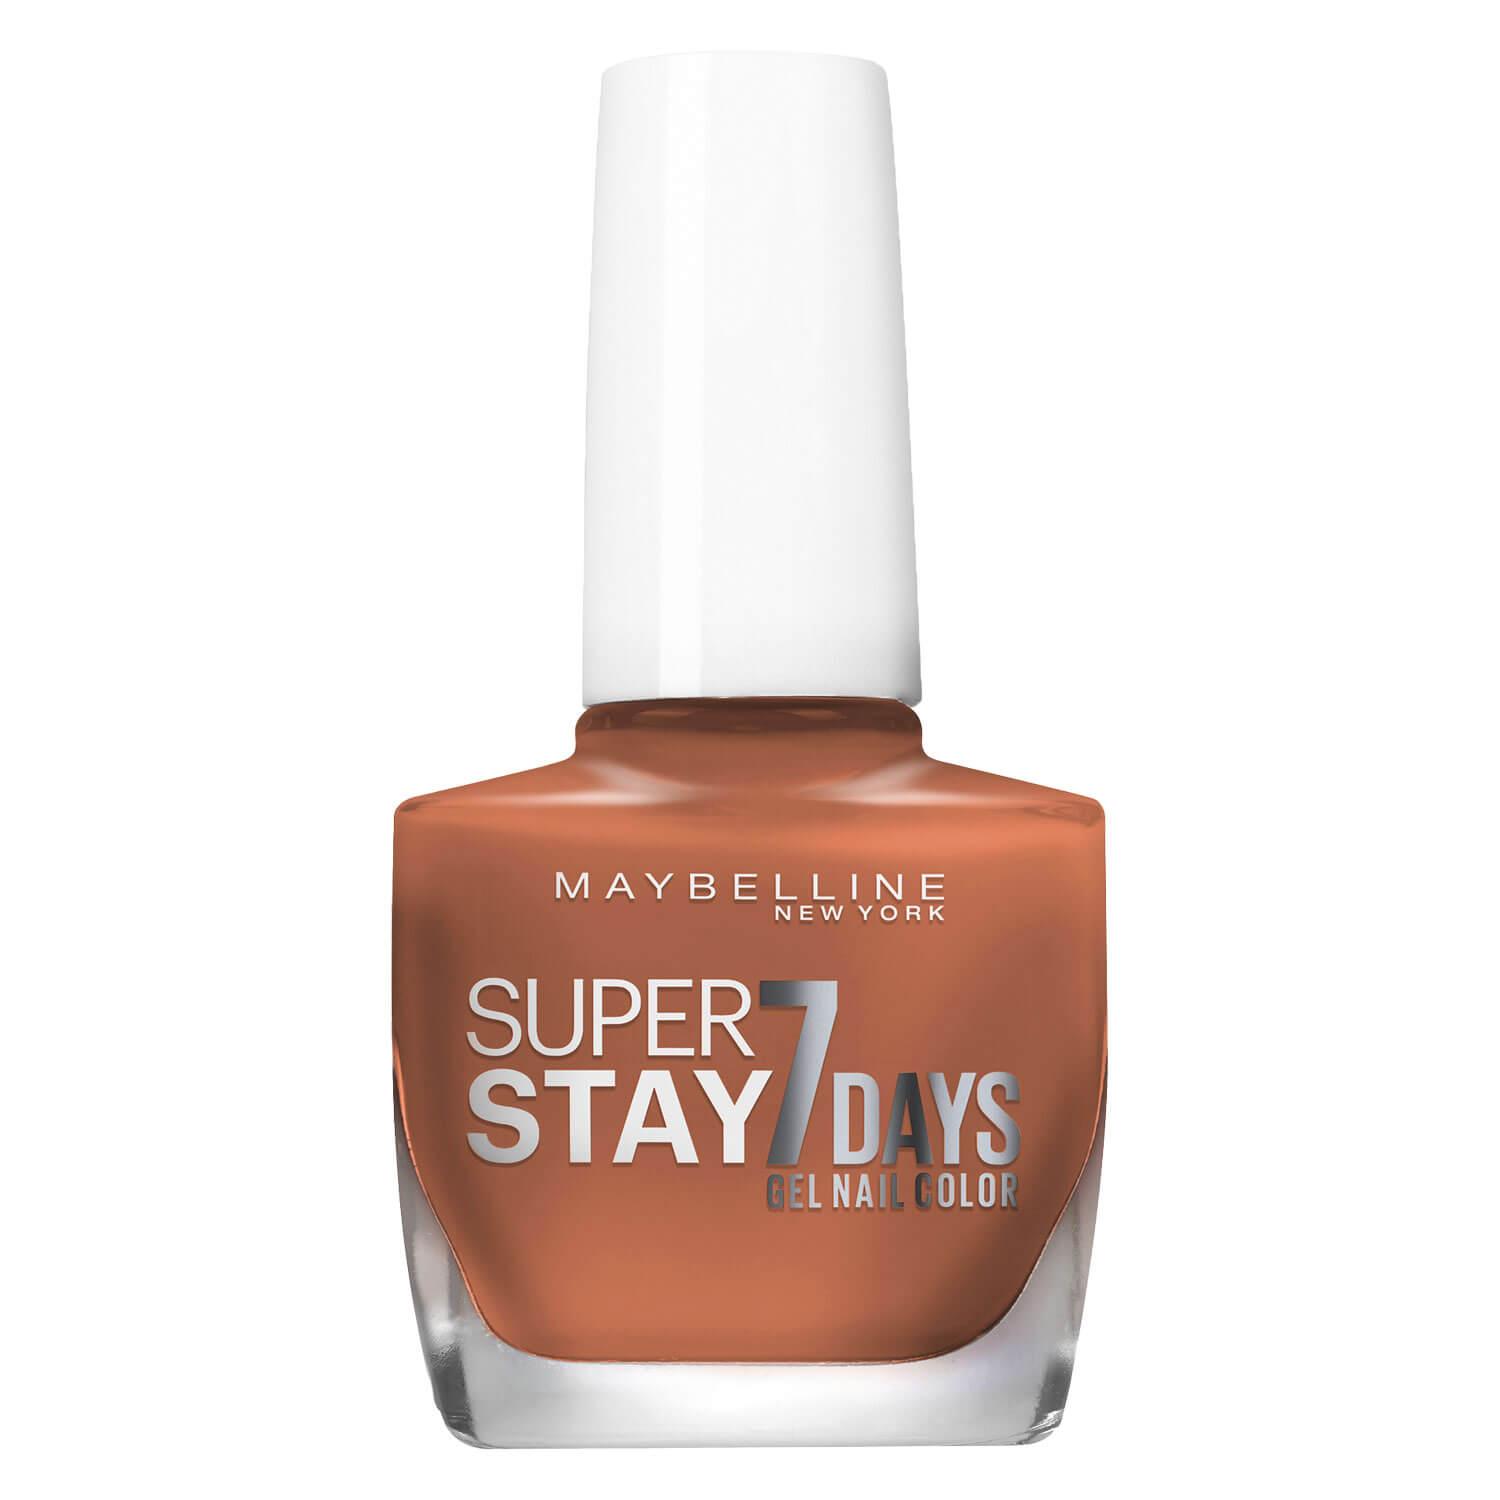 Maybelline NY Nails - Super Stay 7 Days Nagellack Nr. 931 Brownstone